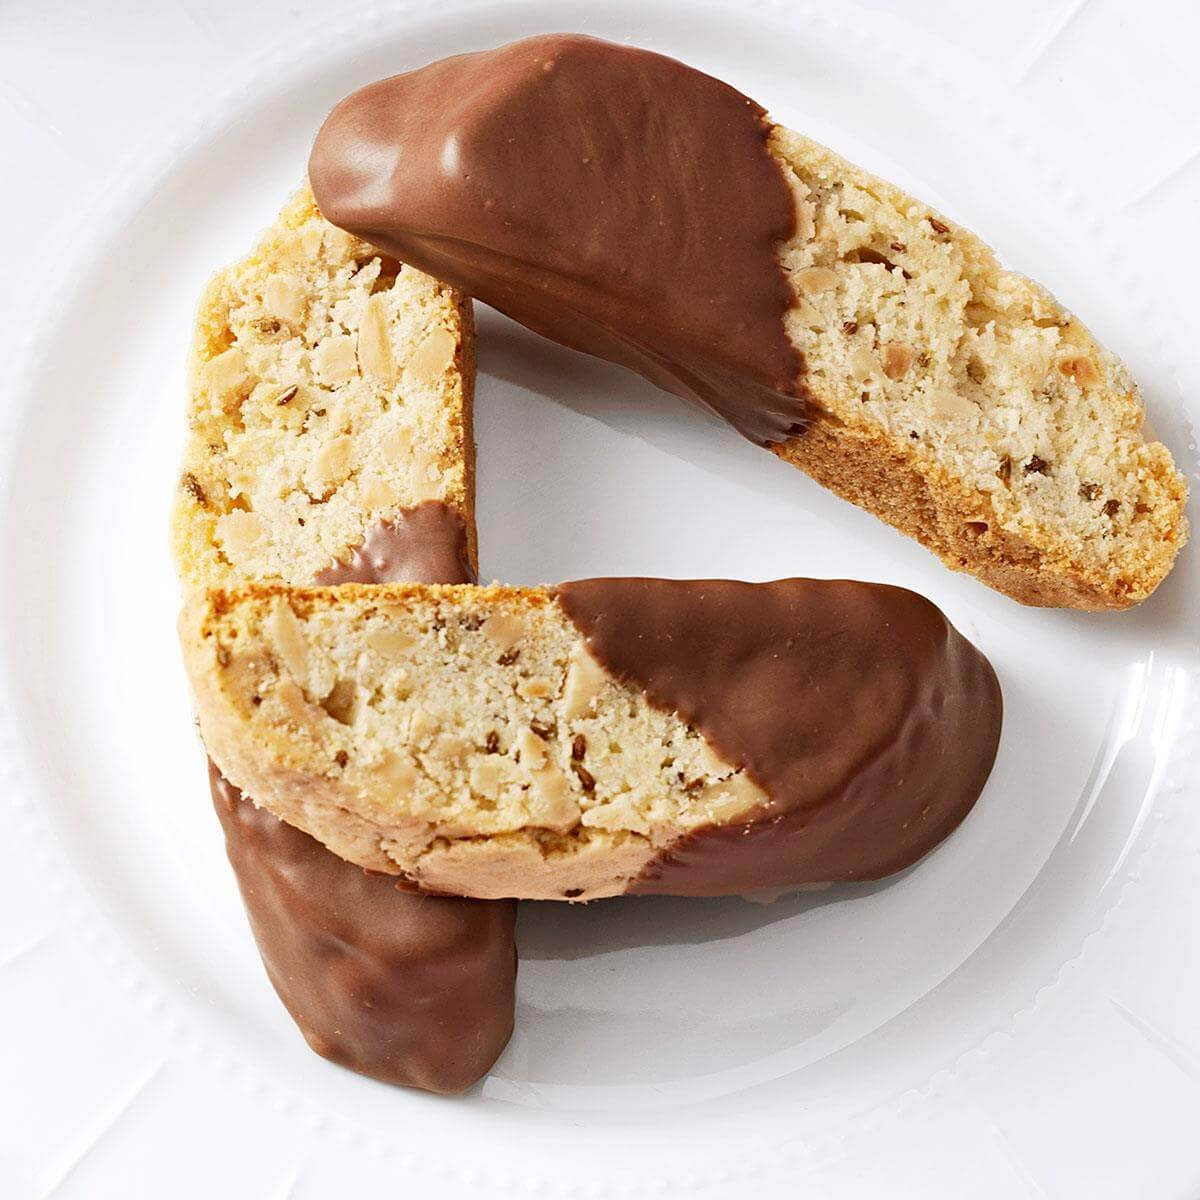 Chocolate-Dipped Anise Biscotti Recipe | Taste of Home